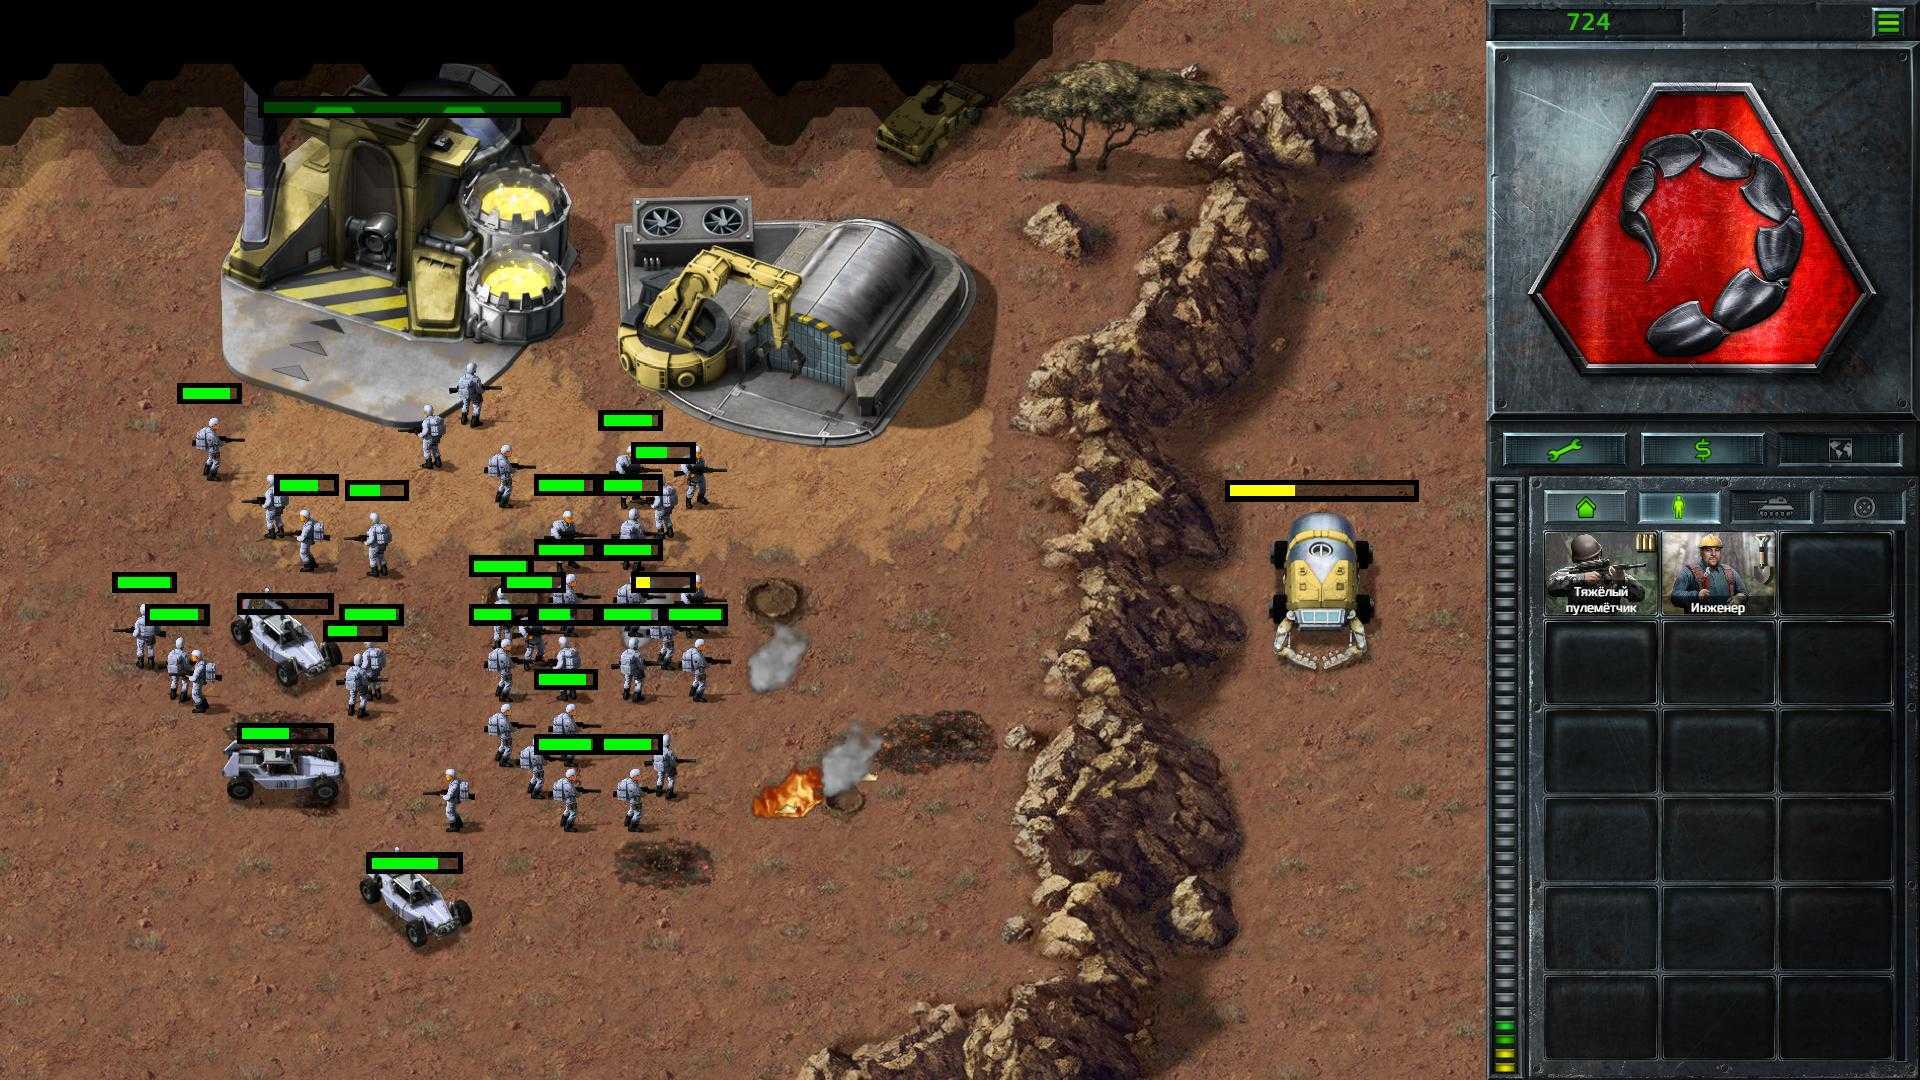 Command and conquer remastered. Command Conquer 2 Remastered. Command and Conquer 1995 Remaster. Command Conquer Remastered collection 2020.